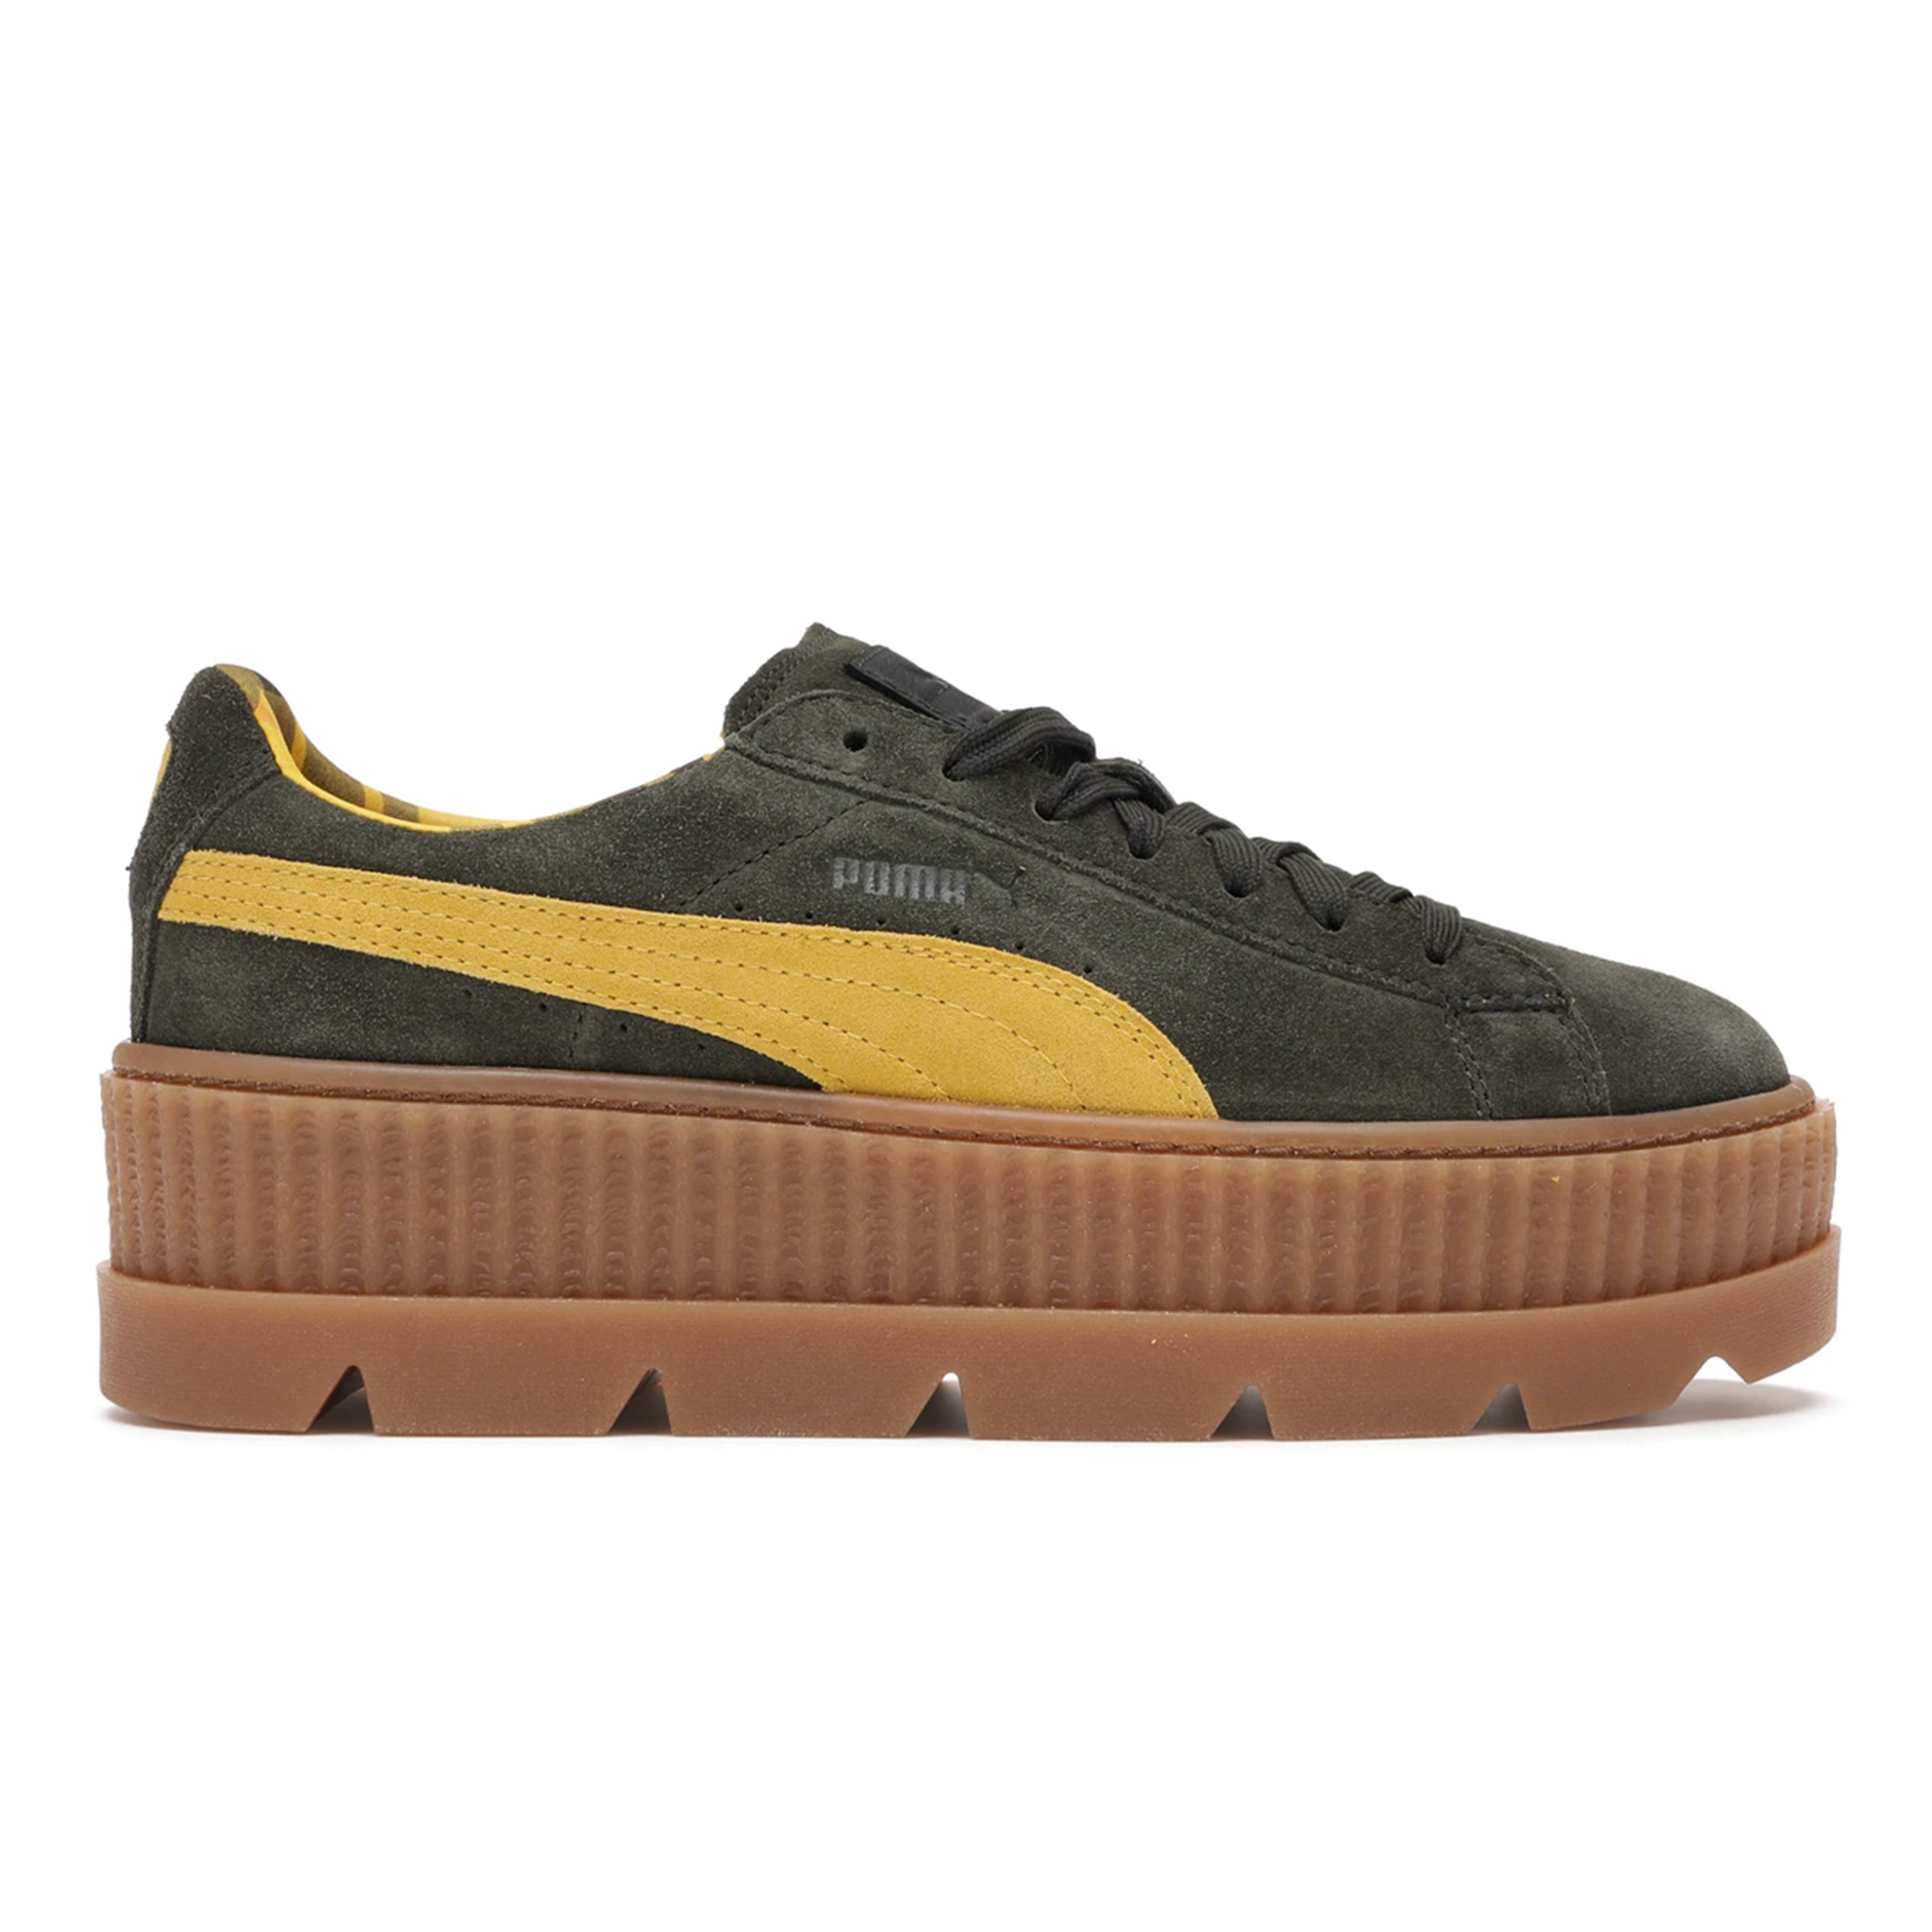 Puma By Rihanna Cleated Creeper Lace Up Suede Women Trainers 366268 01